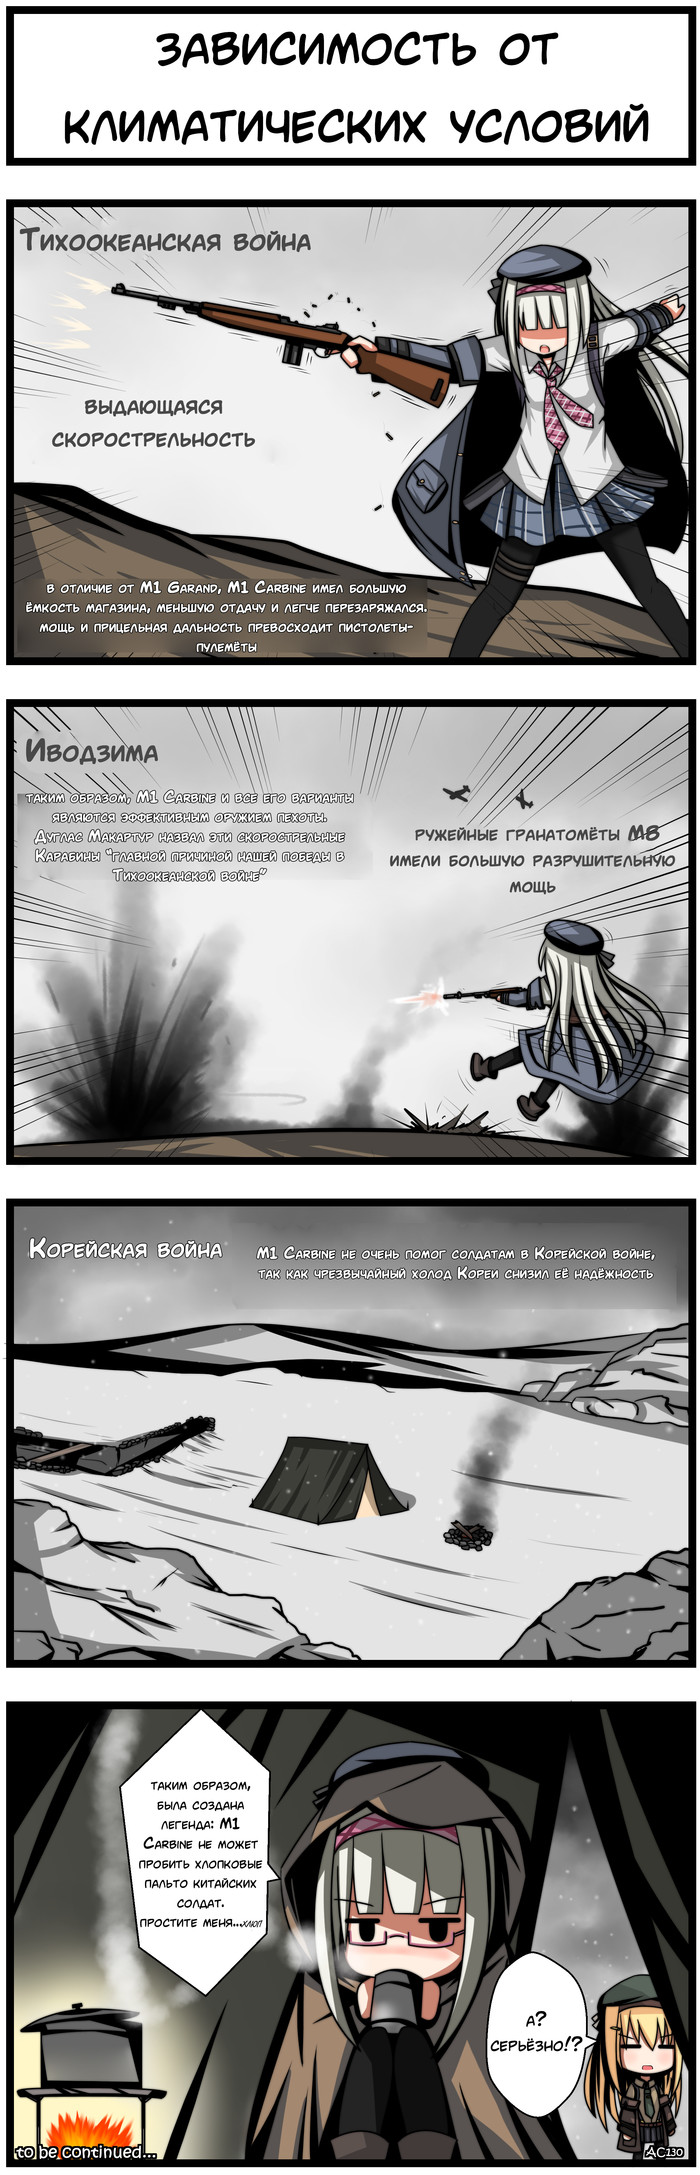 Interesting facts about the weapons of the allies - Anime, Girls frontline, , The Second World War, Korean war, Comics, , Longpost